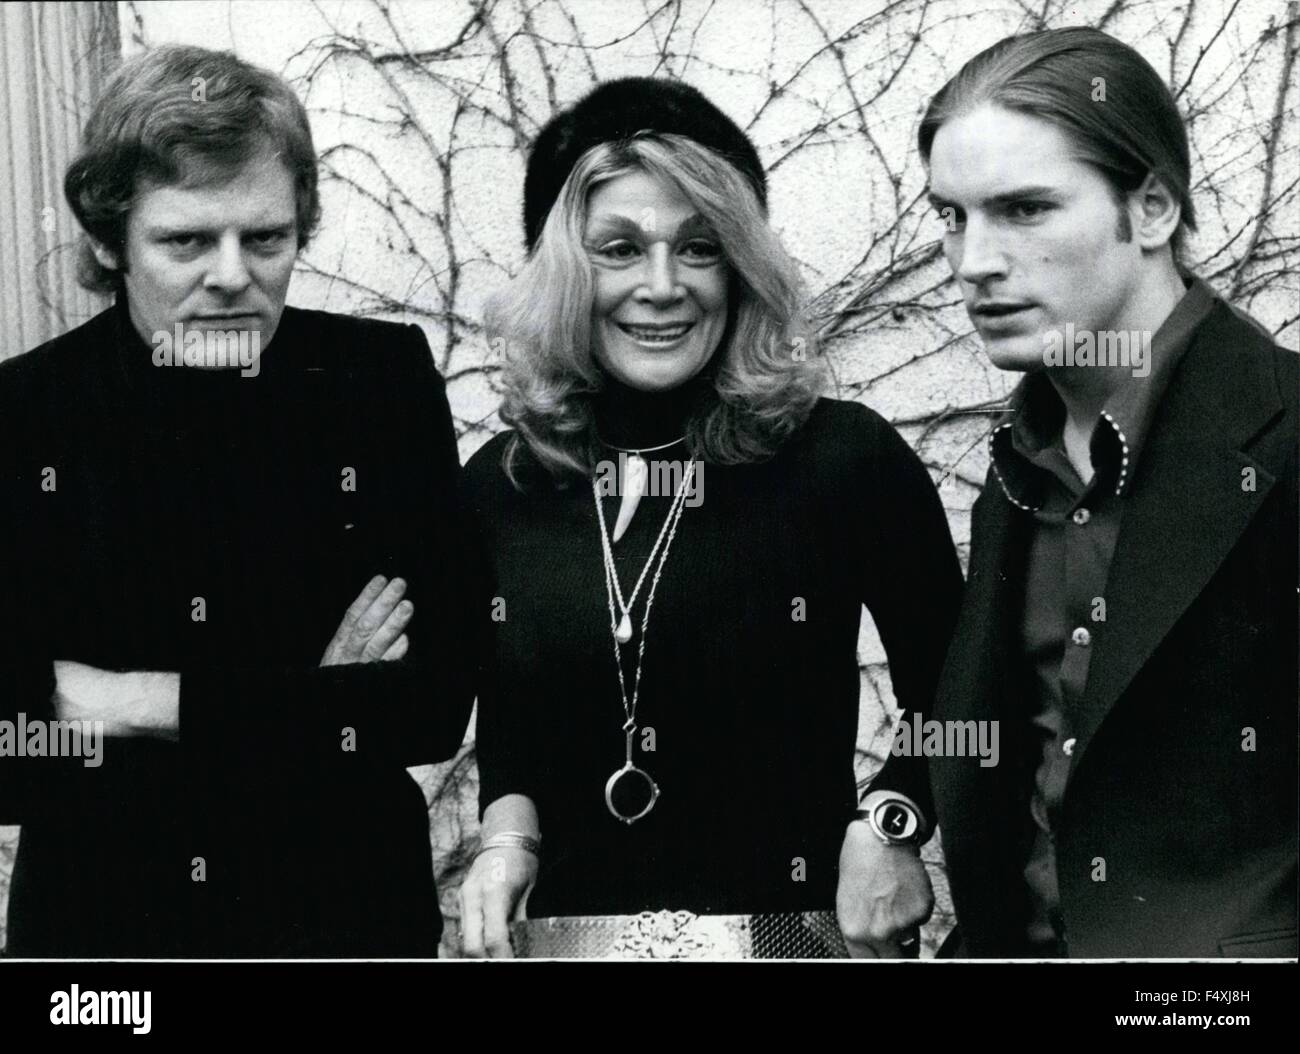 1973 - The stars of Warhol s film Ã Hollywood visit Munich he stars of the new film of Andy Warhol s Factory Hollywood came to Munich now for itÃ¢â‚¬â„¢s premiere in Germany. OPS: from left to right, director Paul Morrissey, Sylvia Miles and Joe Dallesandro. Keystone West Germany 19-1-73 © Keystone Pictures USA/ZUMAPRESS.com/Alamy Live News Stock Photo